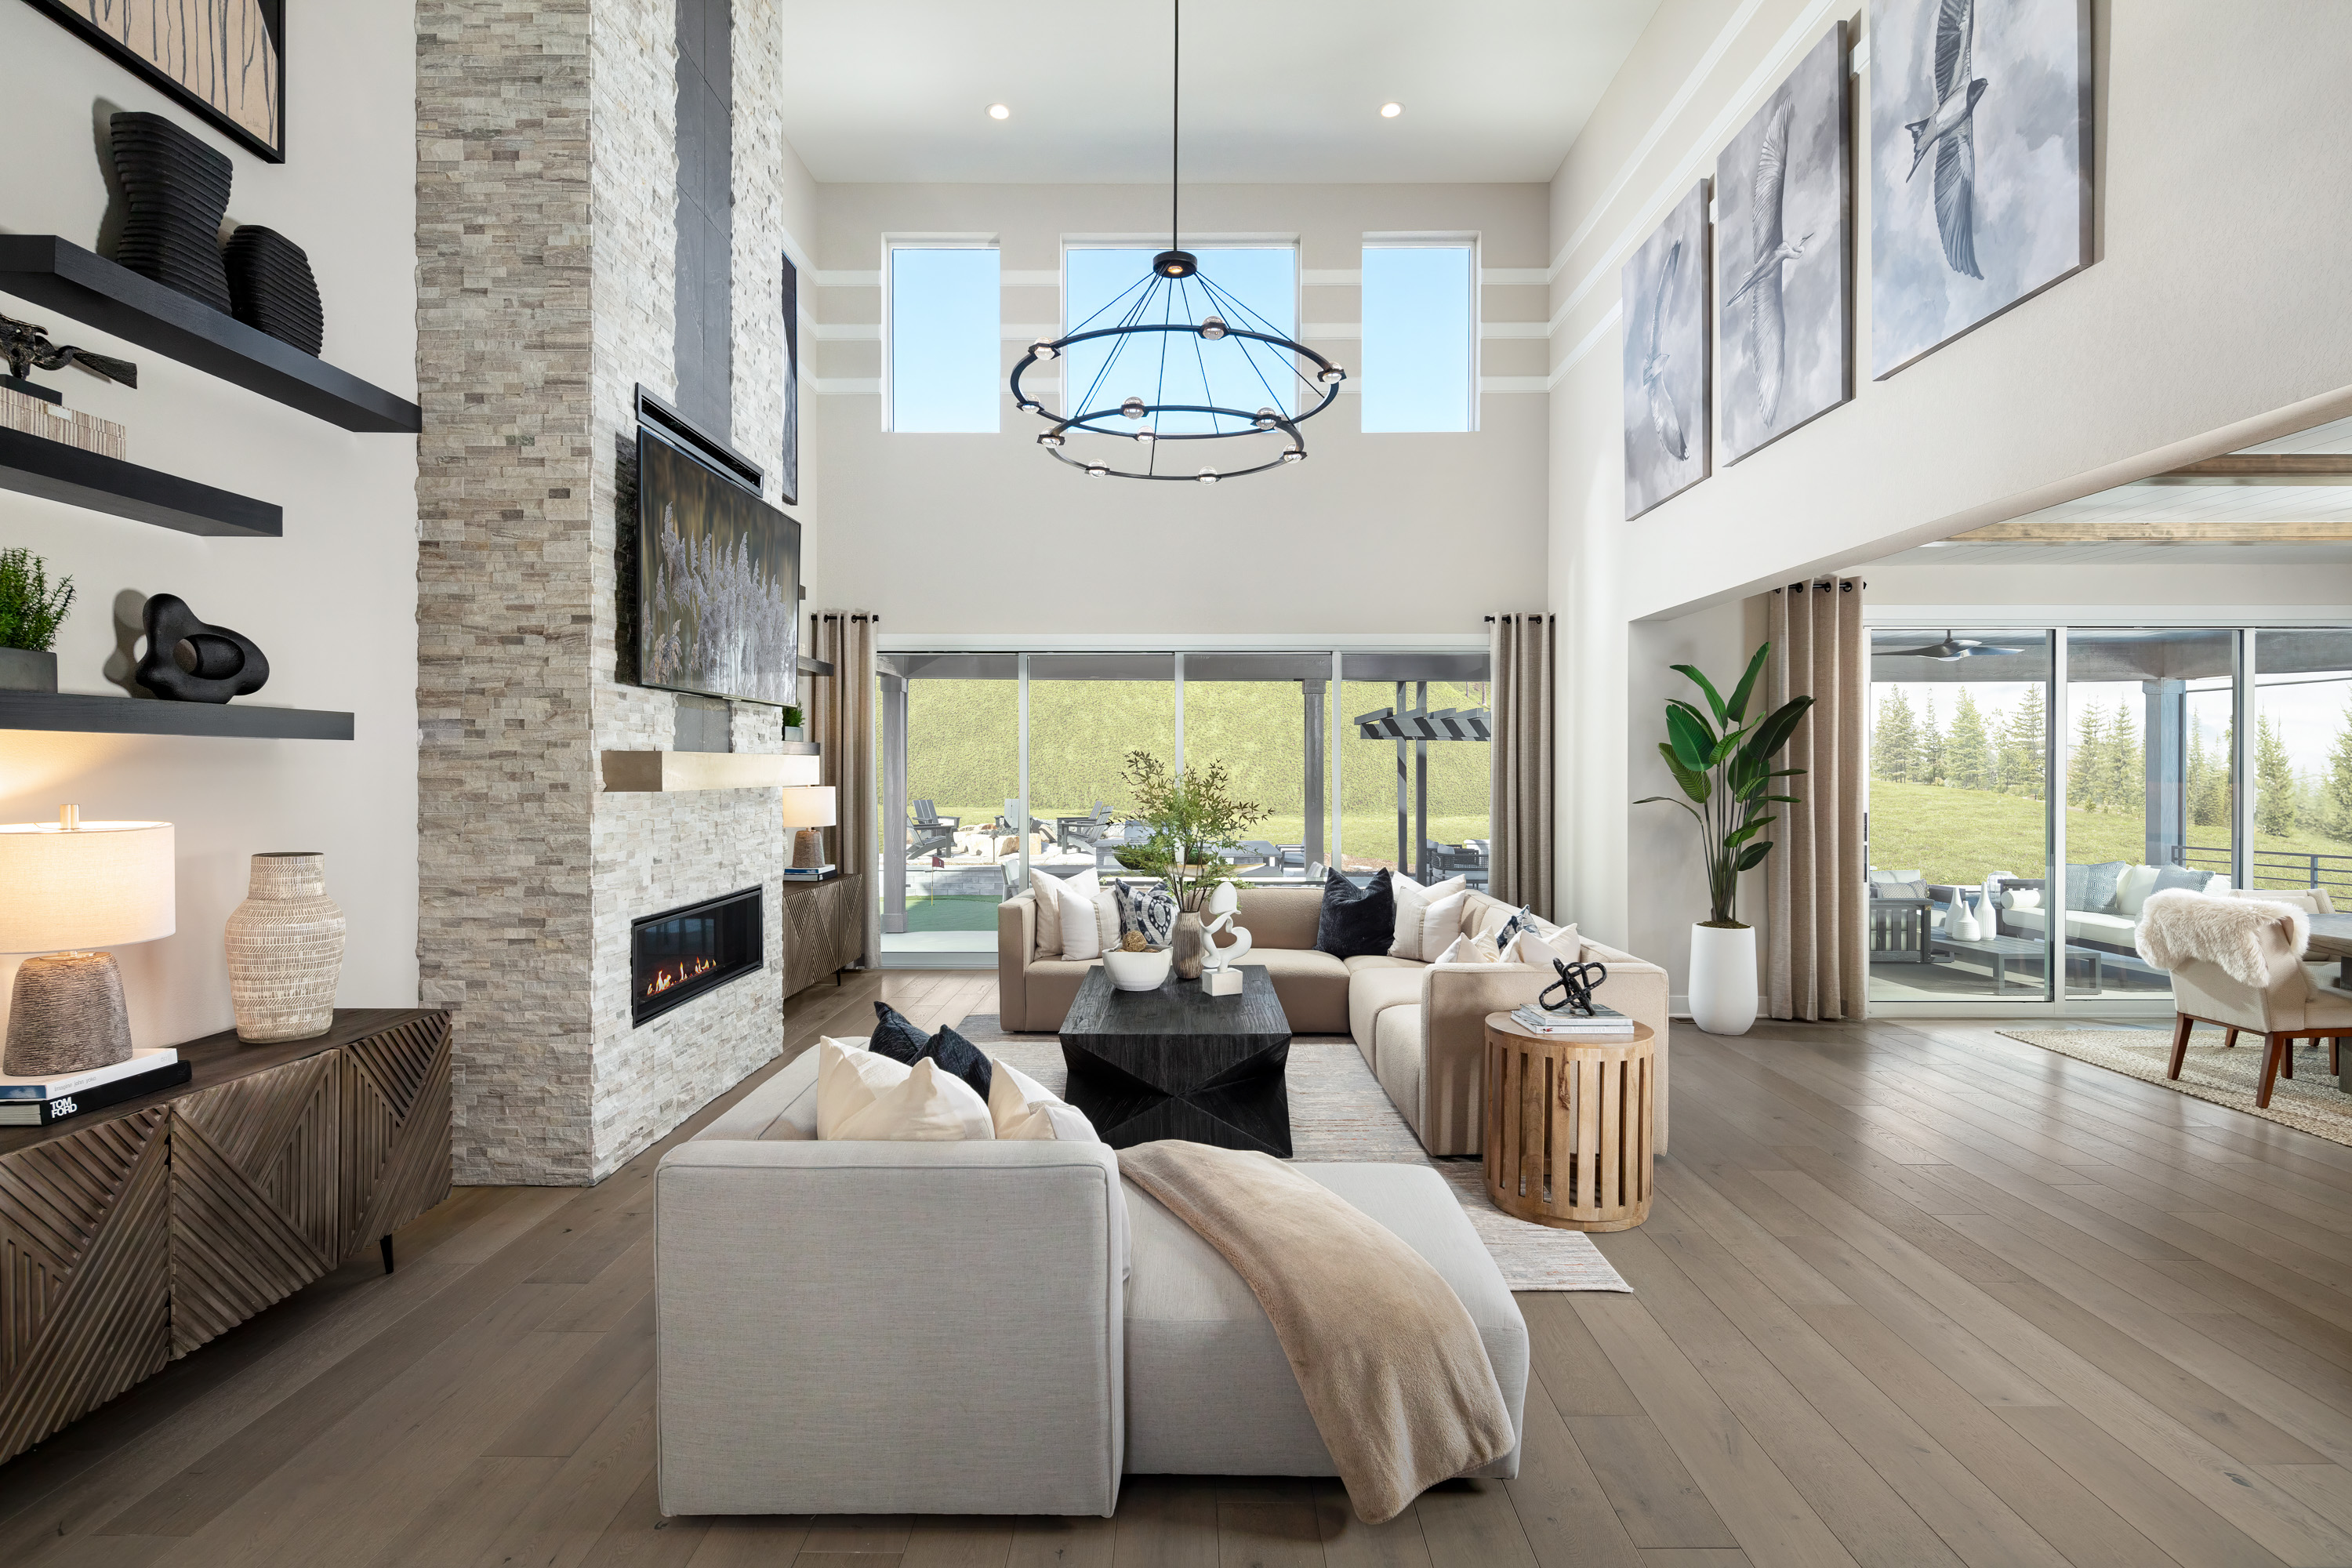 “This neighborhood truly exemplifies the Toll Brothers luxury brand that we’re known for,” said Reggie Carveth, Division President of Toll Brothers in Colorado.